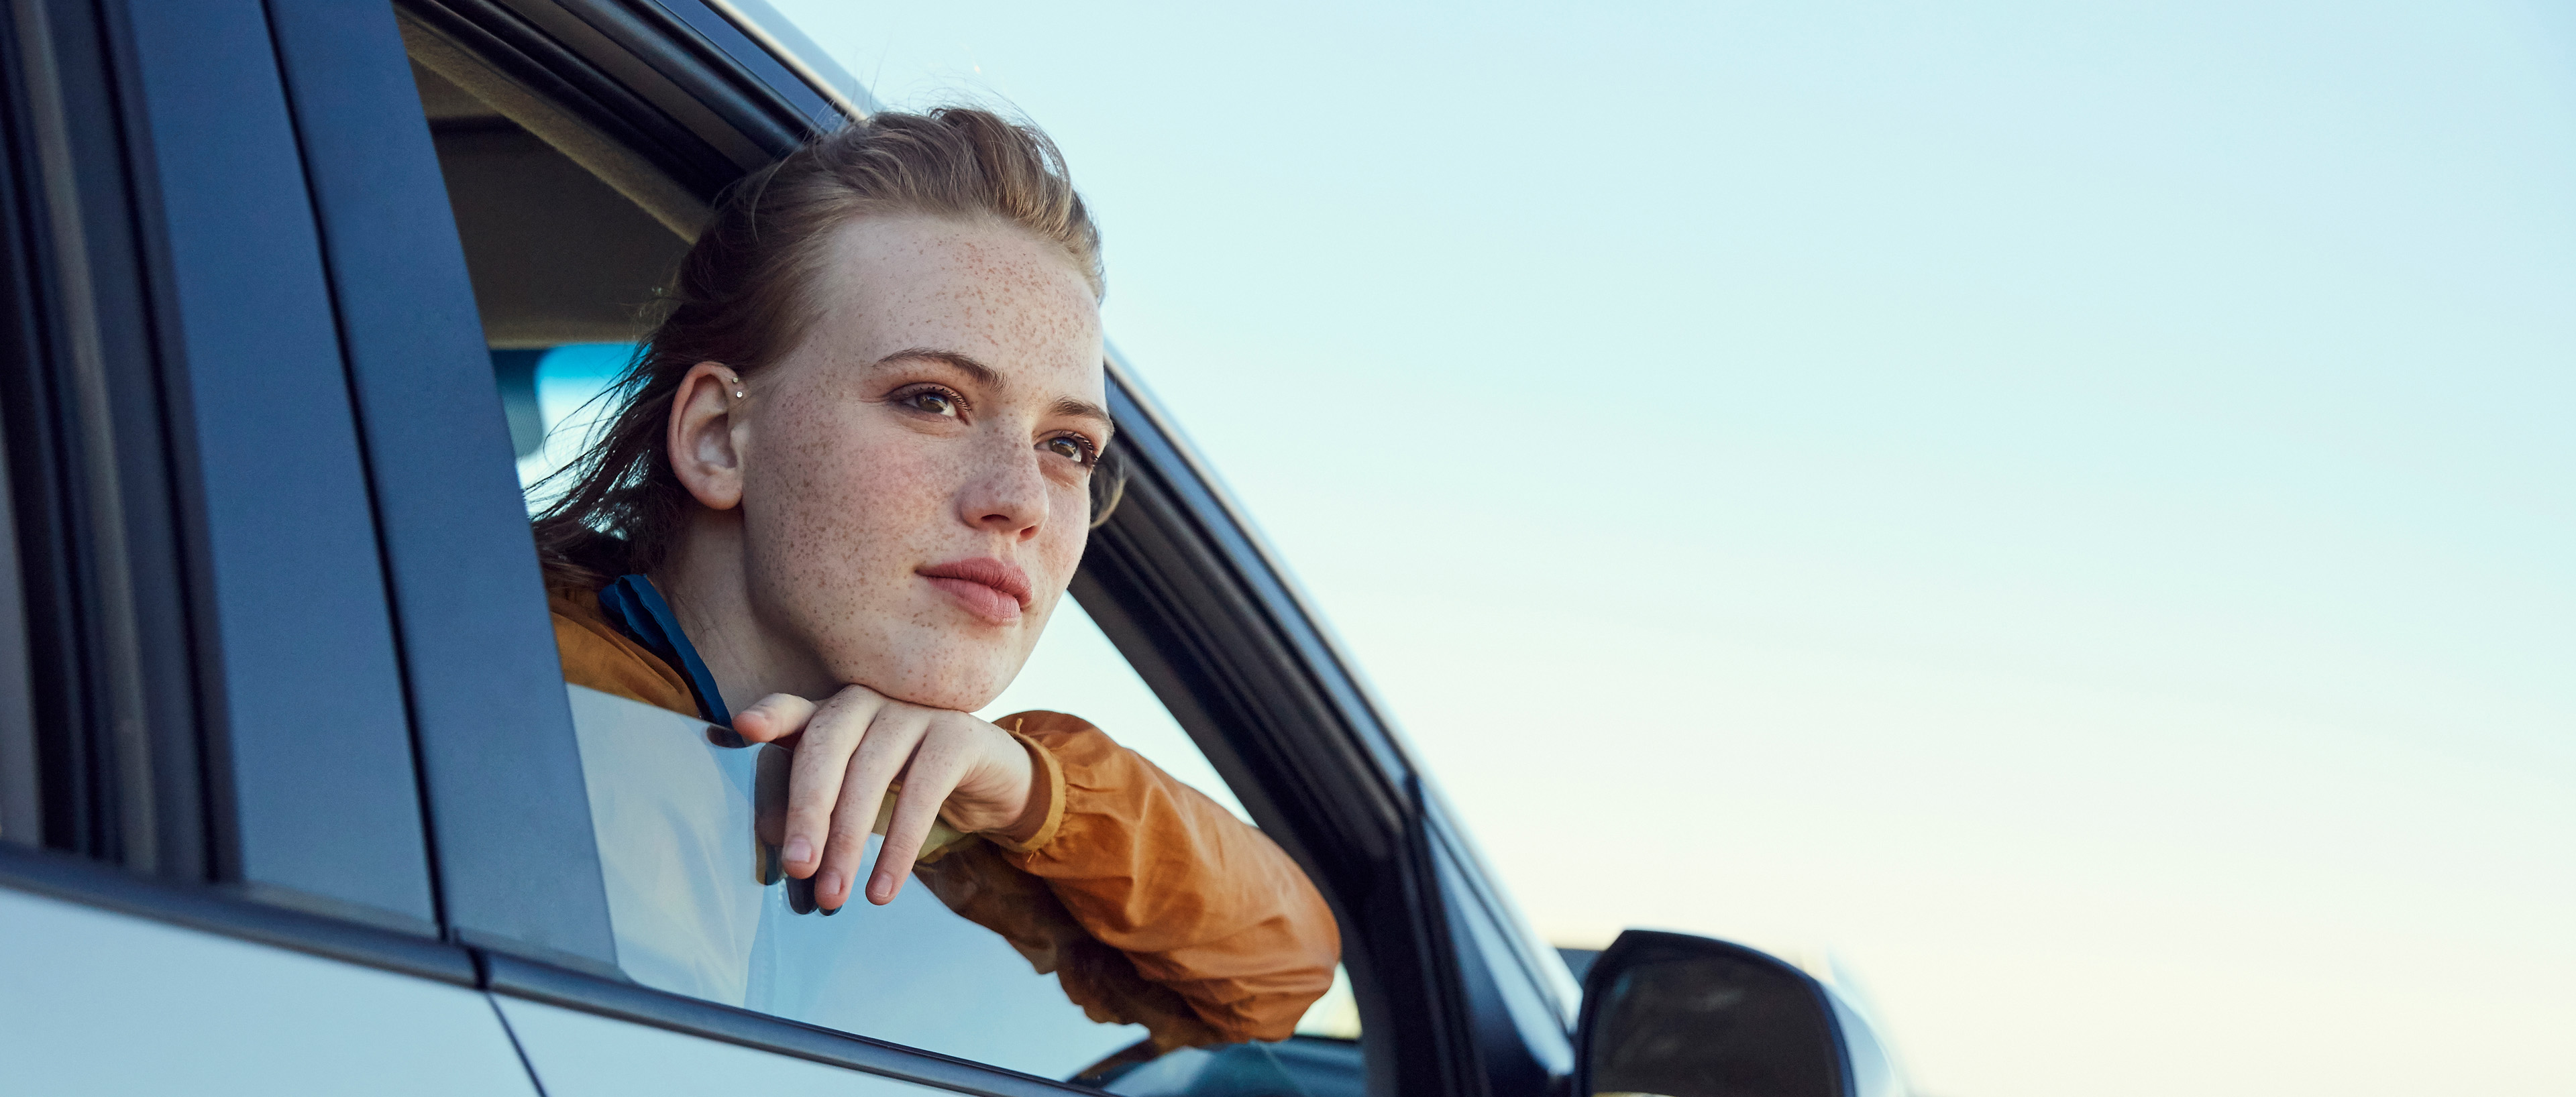 Young woman looking out of a car